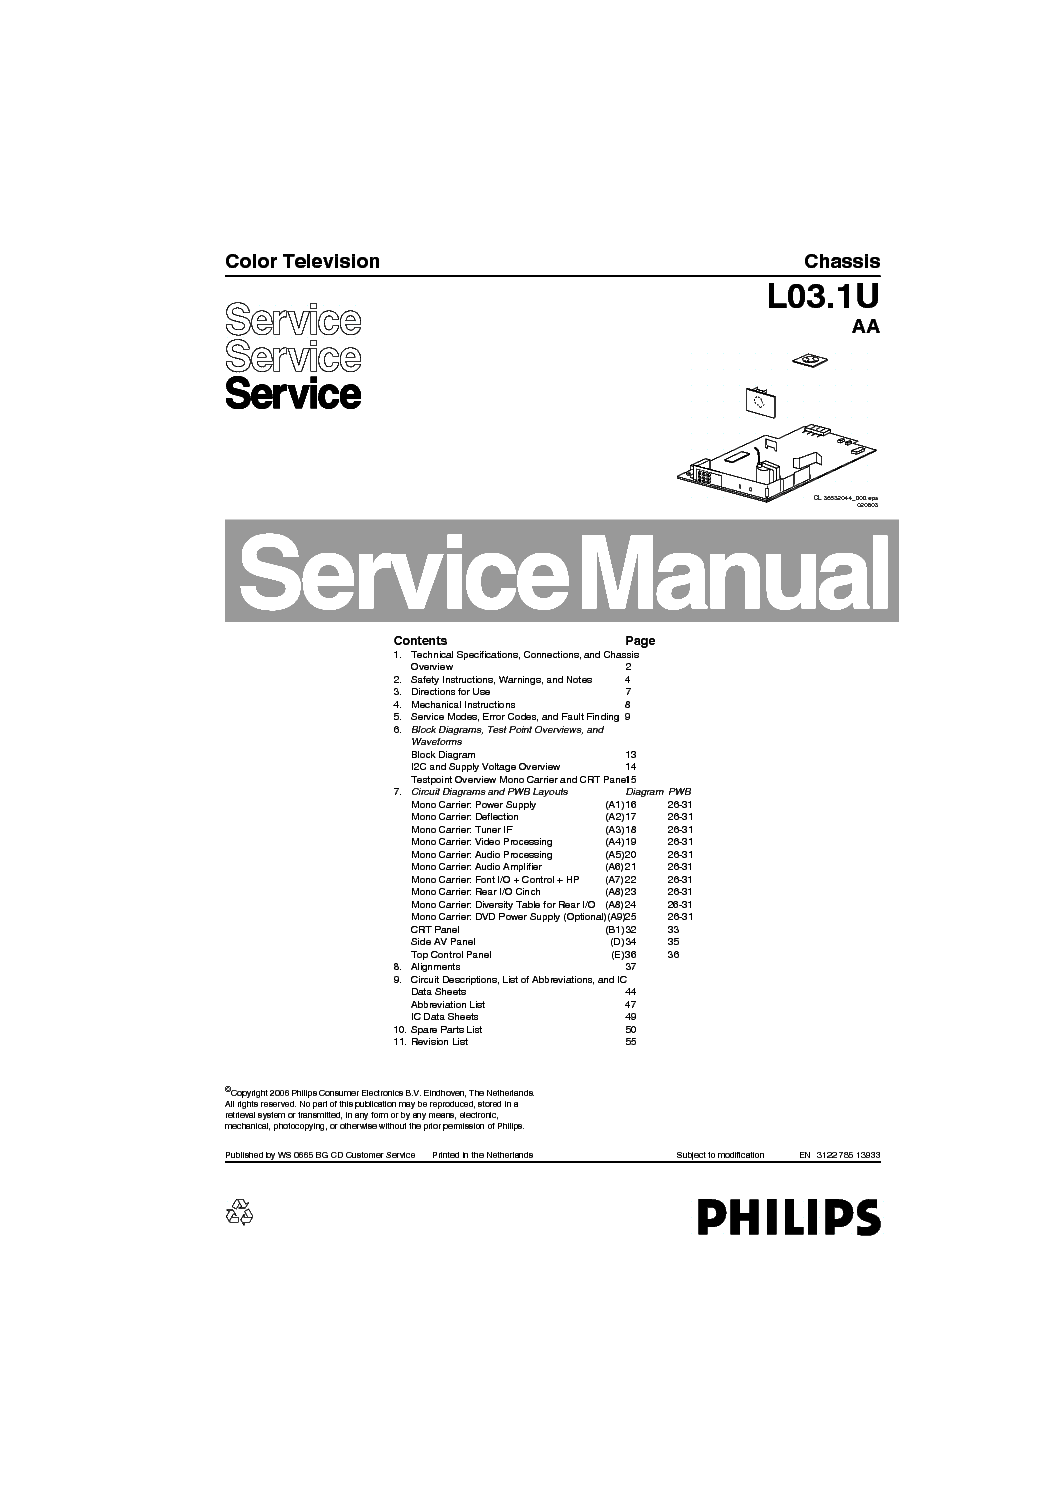 PHILIPS CHASSIS L03.1U-AA service manual (1st page)